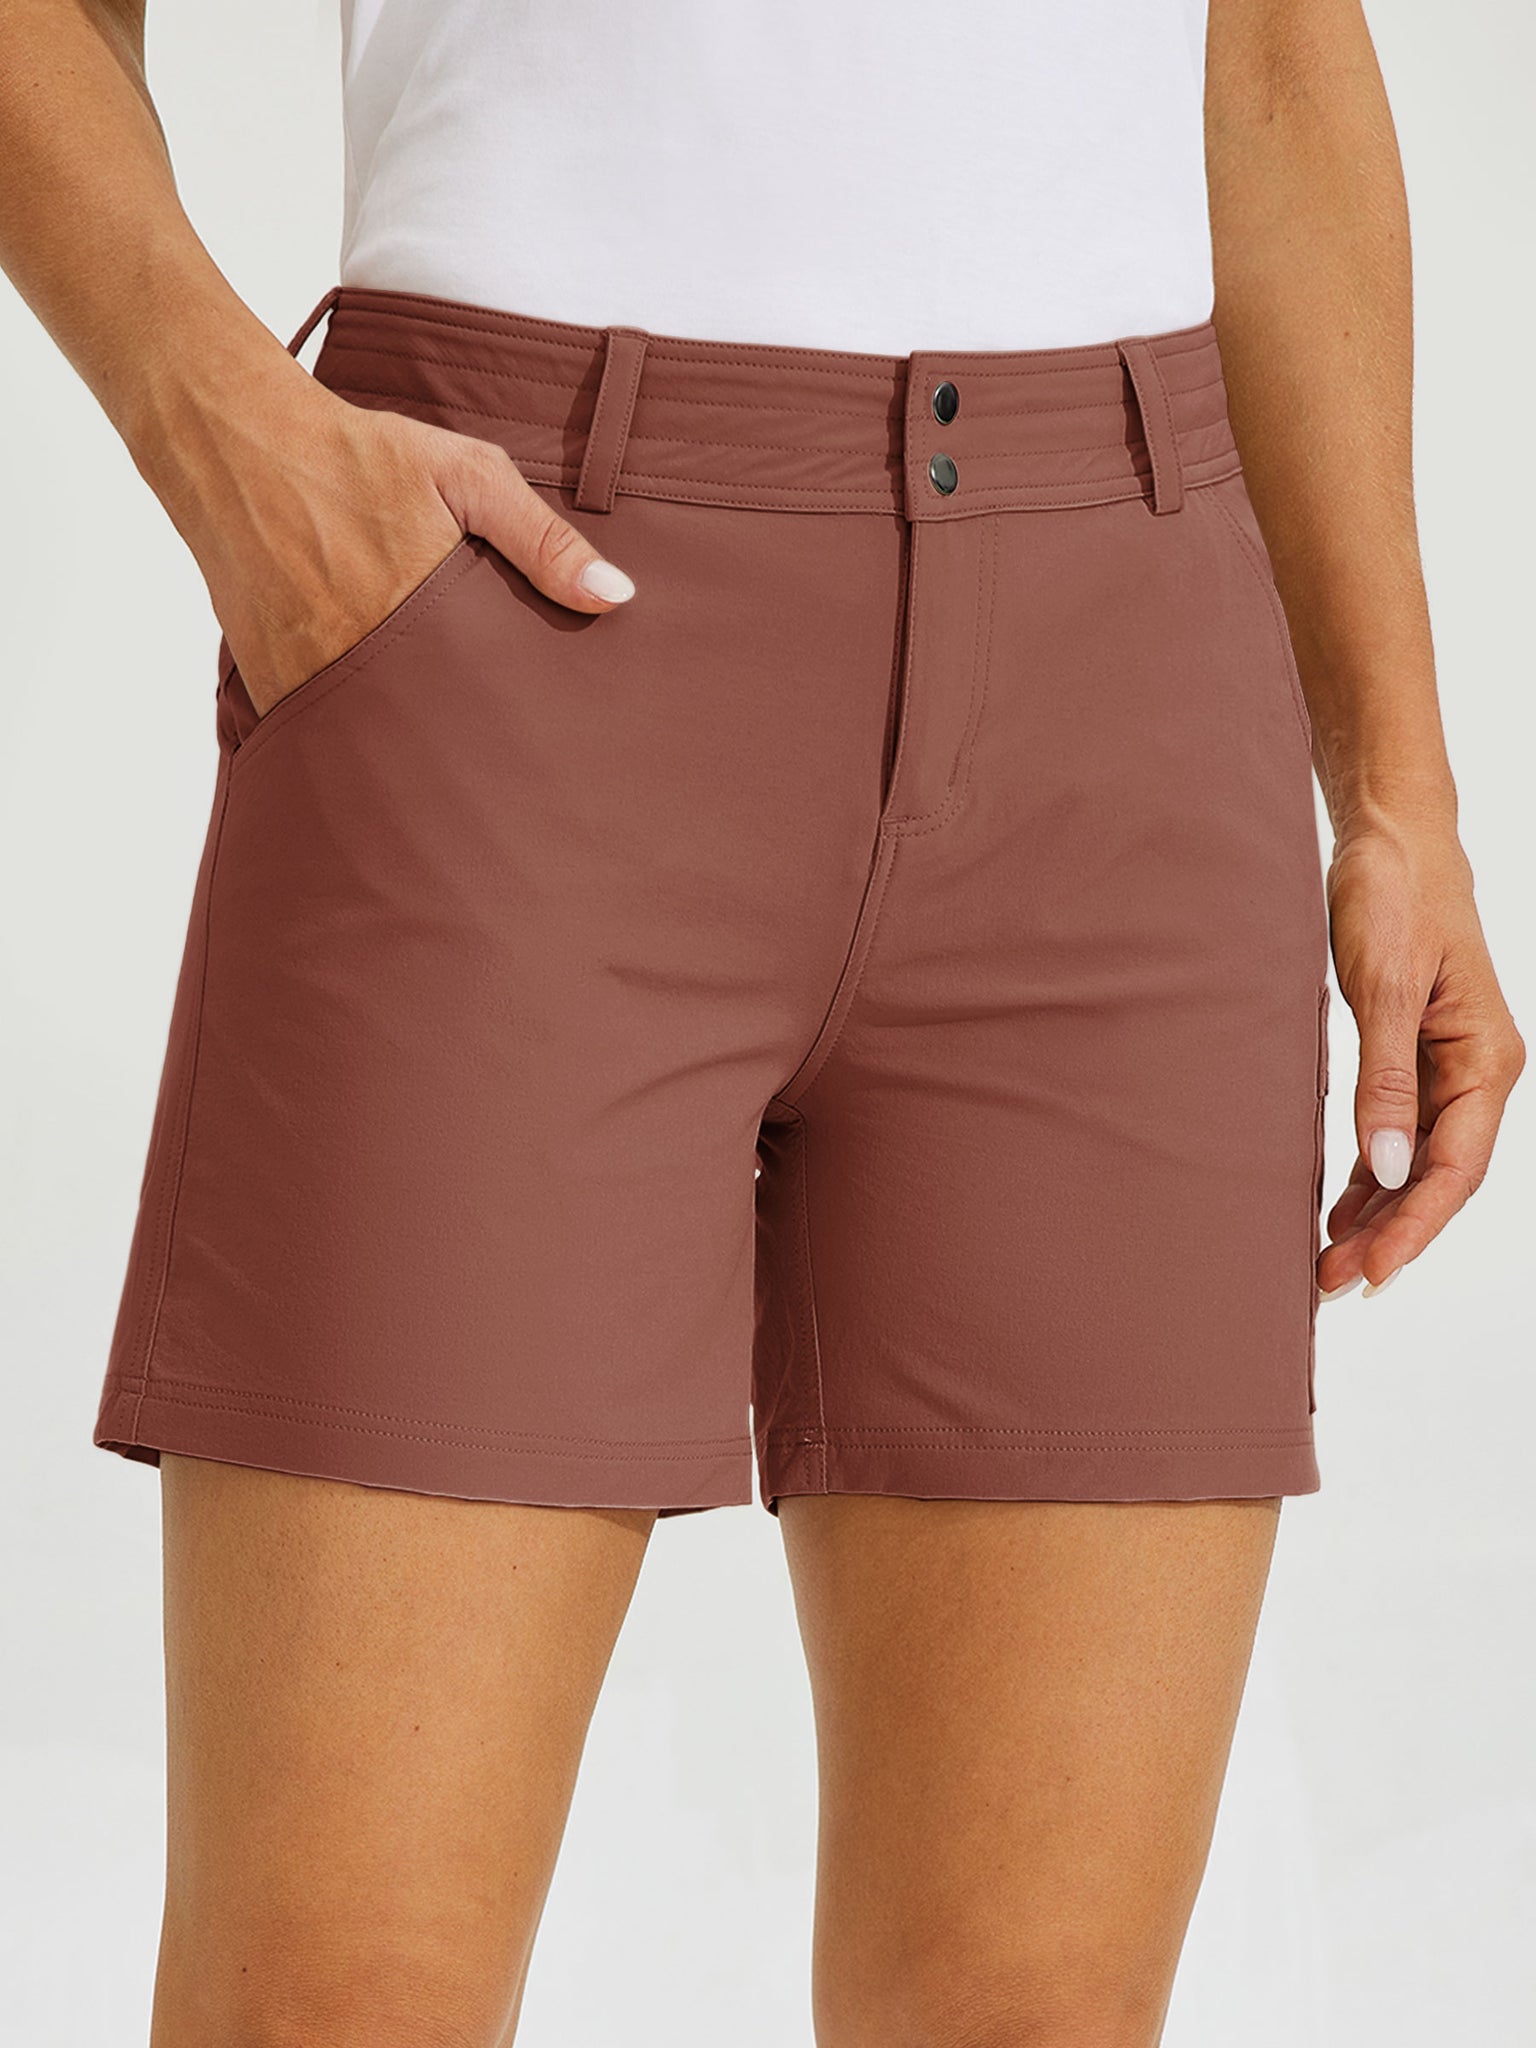 Women's Outdoor Pro Shorts 5Inch_Cacao1